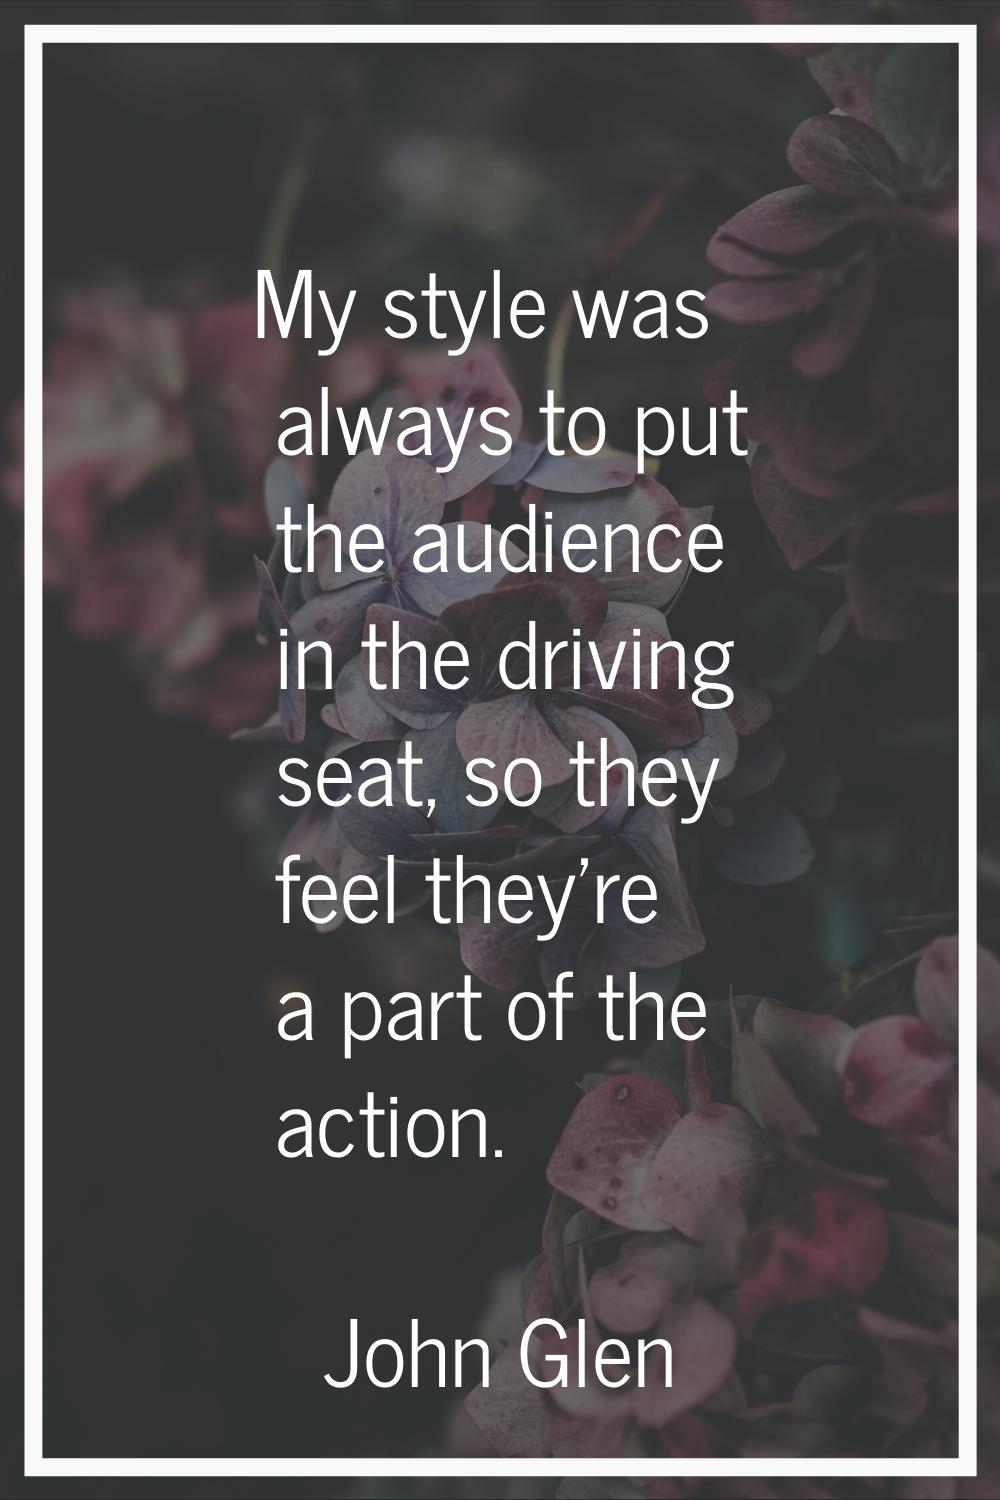 My style was always to put the audience in the driving seat, so they feel they're a part of the act